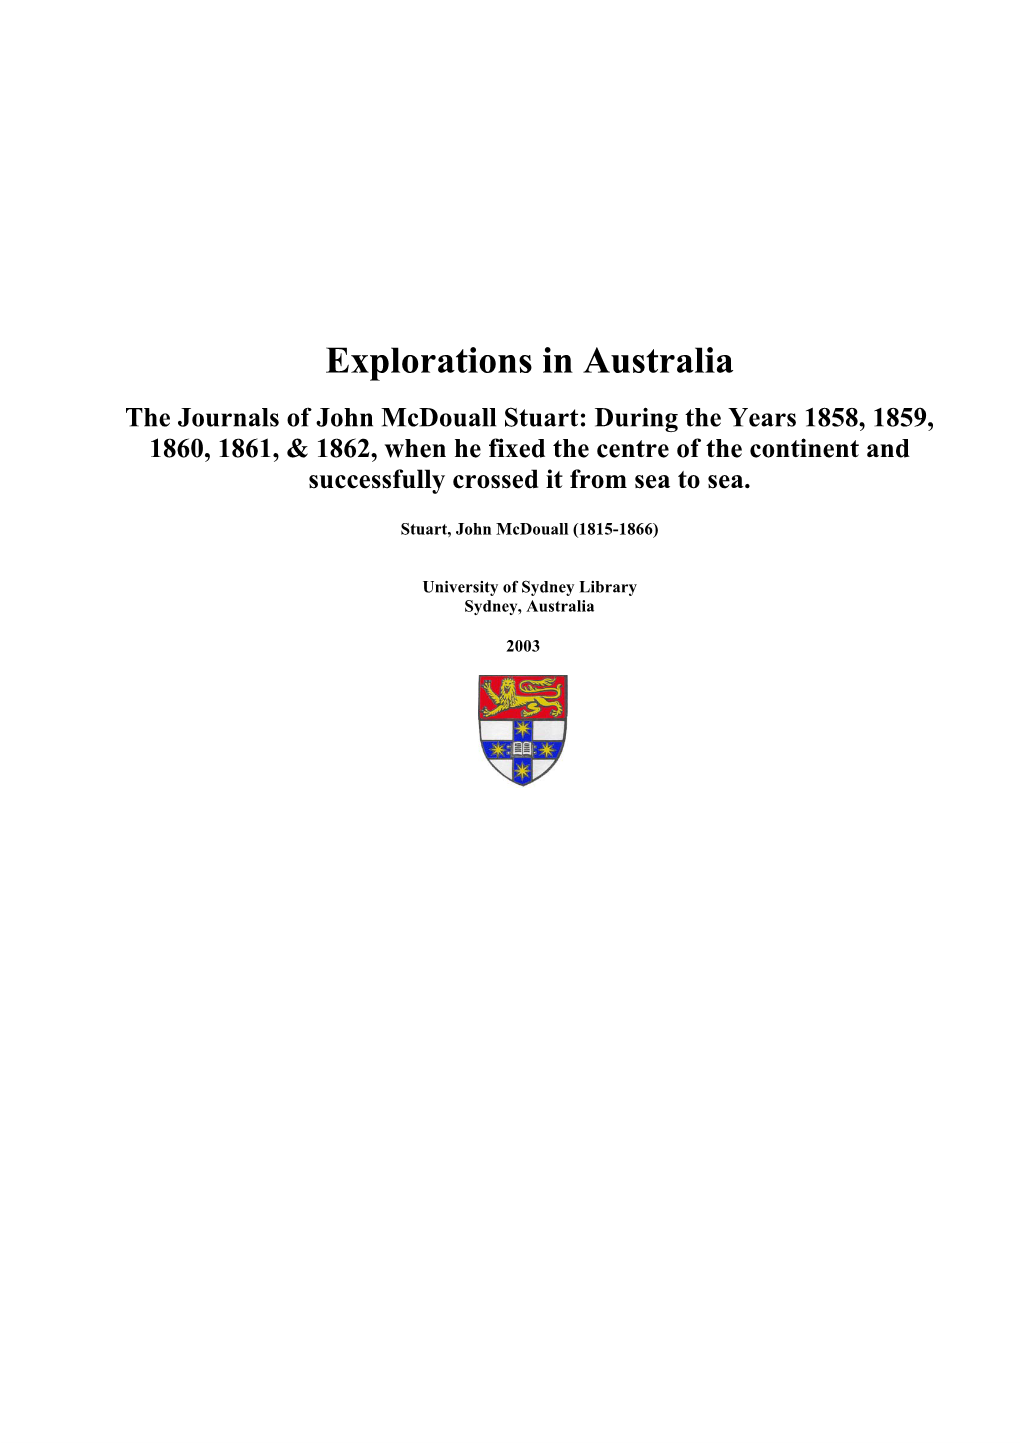 Journal of Mr. Stuart's Third Expedition (In the Vicinity of Lake Torrens)